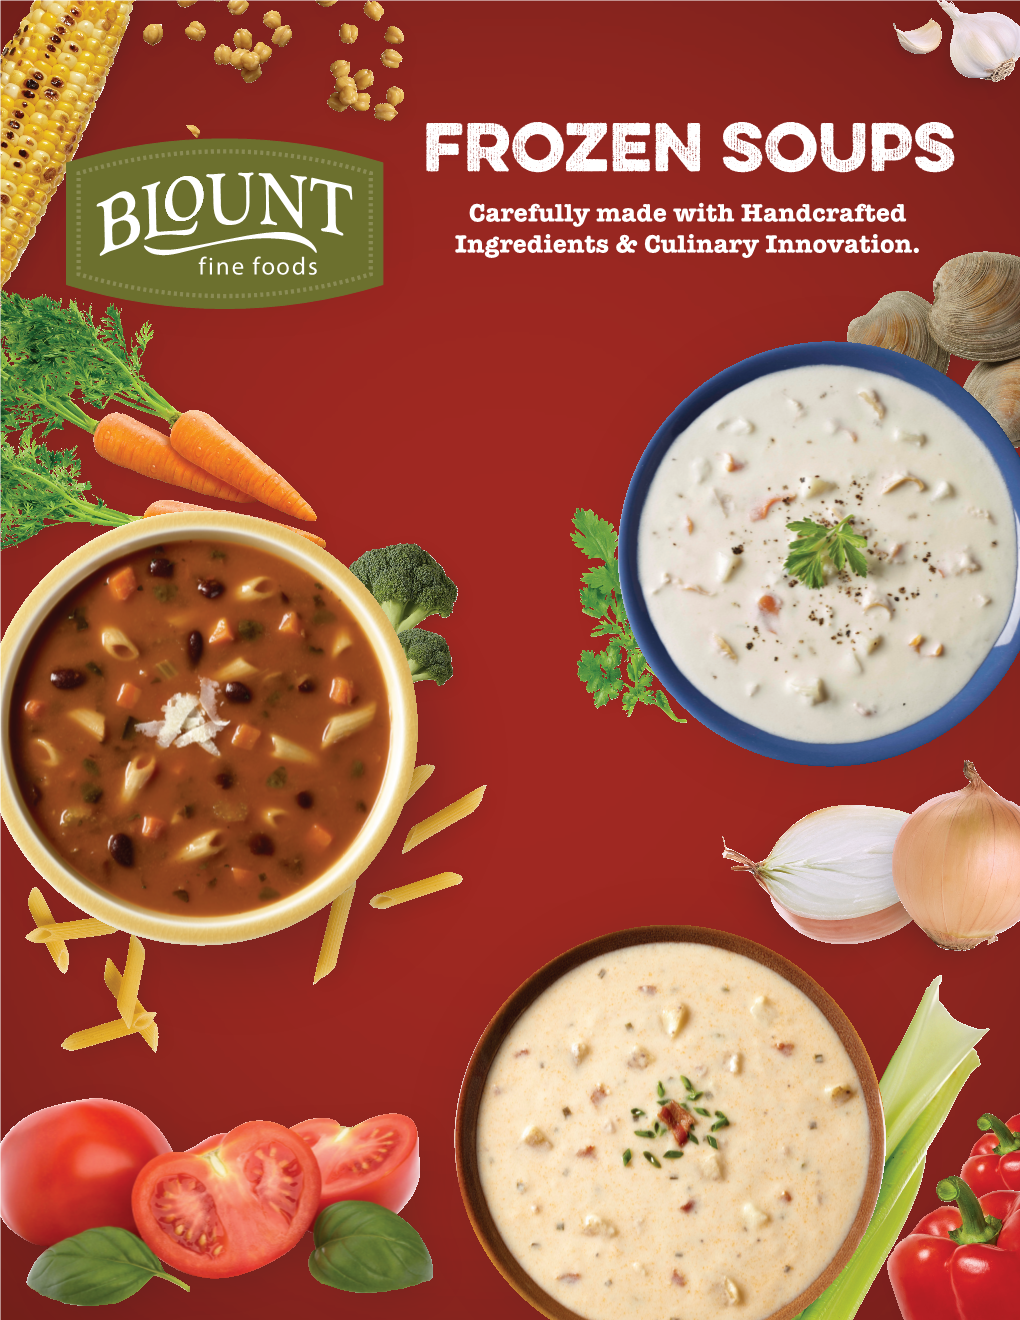 FROZEN SOUPS Carefully Made with Handcrafted Ingredients & Culinary Innovation